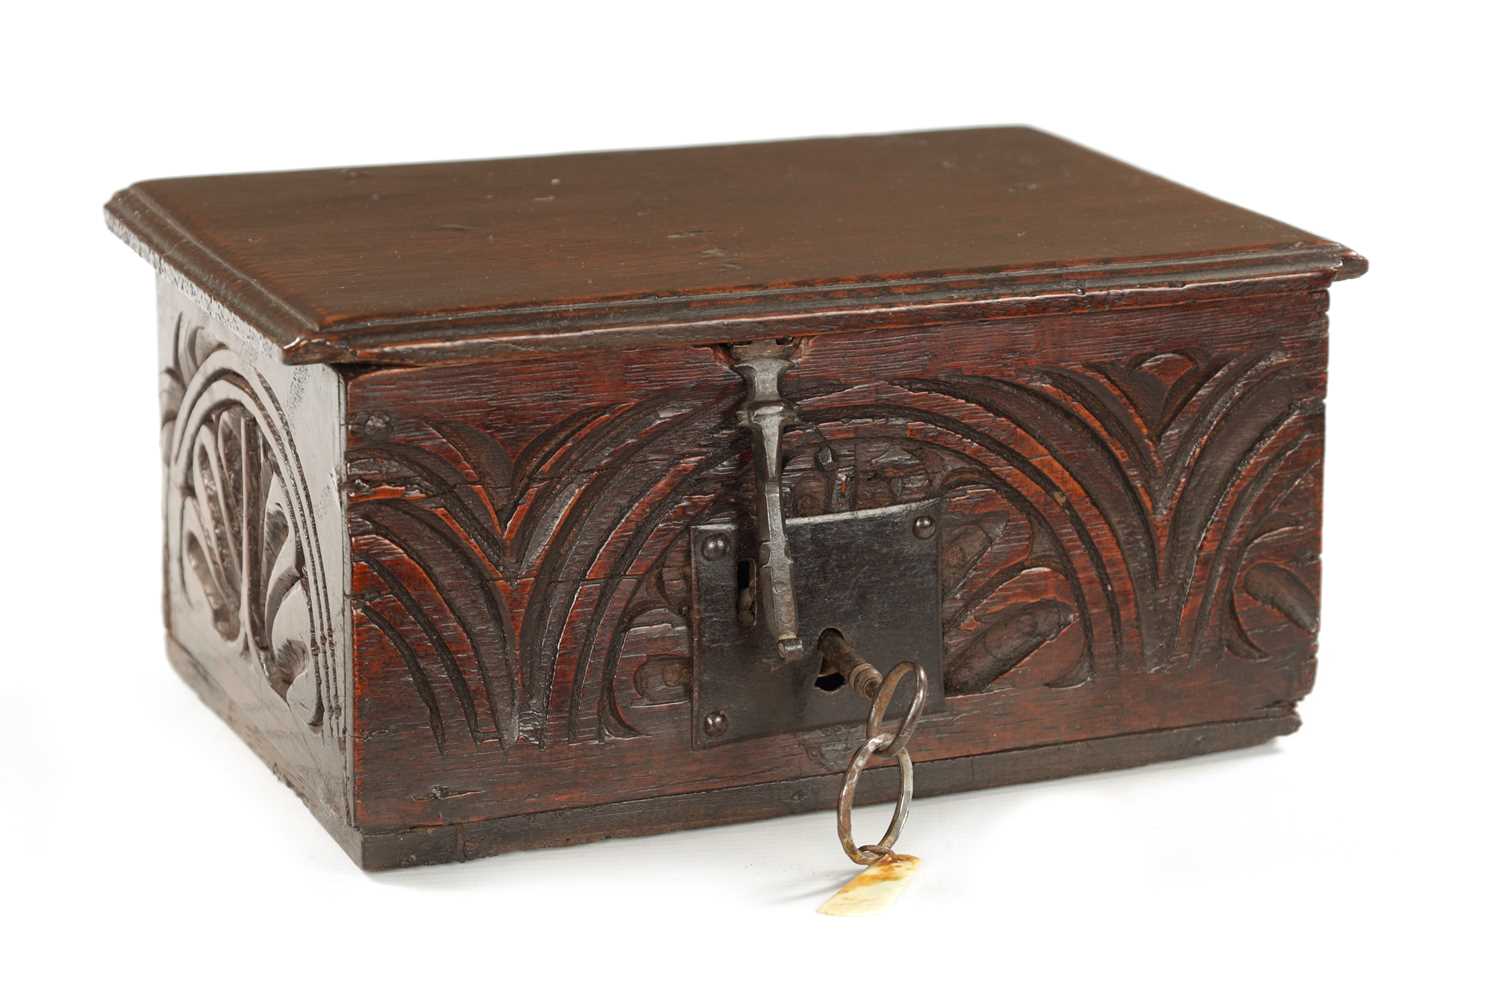 A GOOD 17TH CENTURY UNUSUALLY SMALL OAK BIBLE BOX OF FINE COLOUR AND PATINA